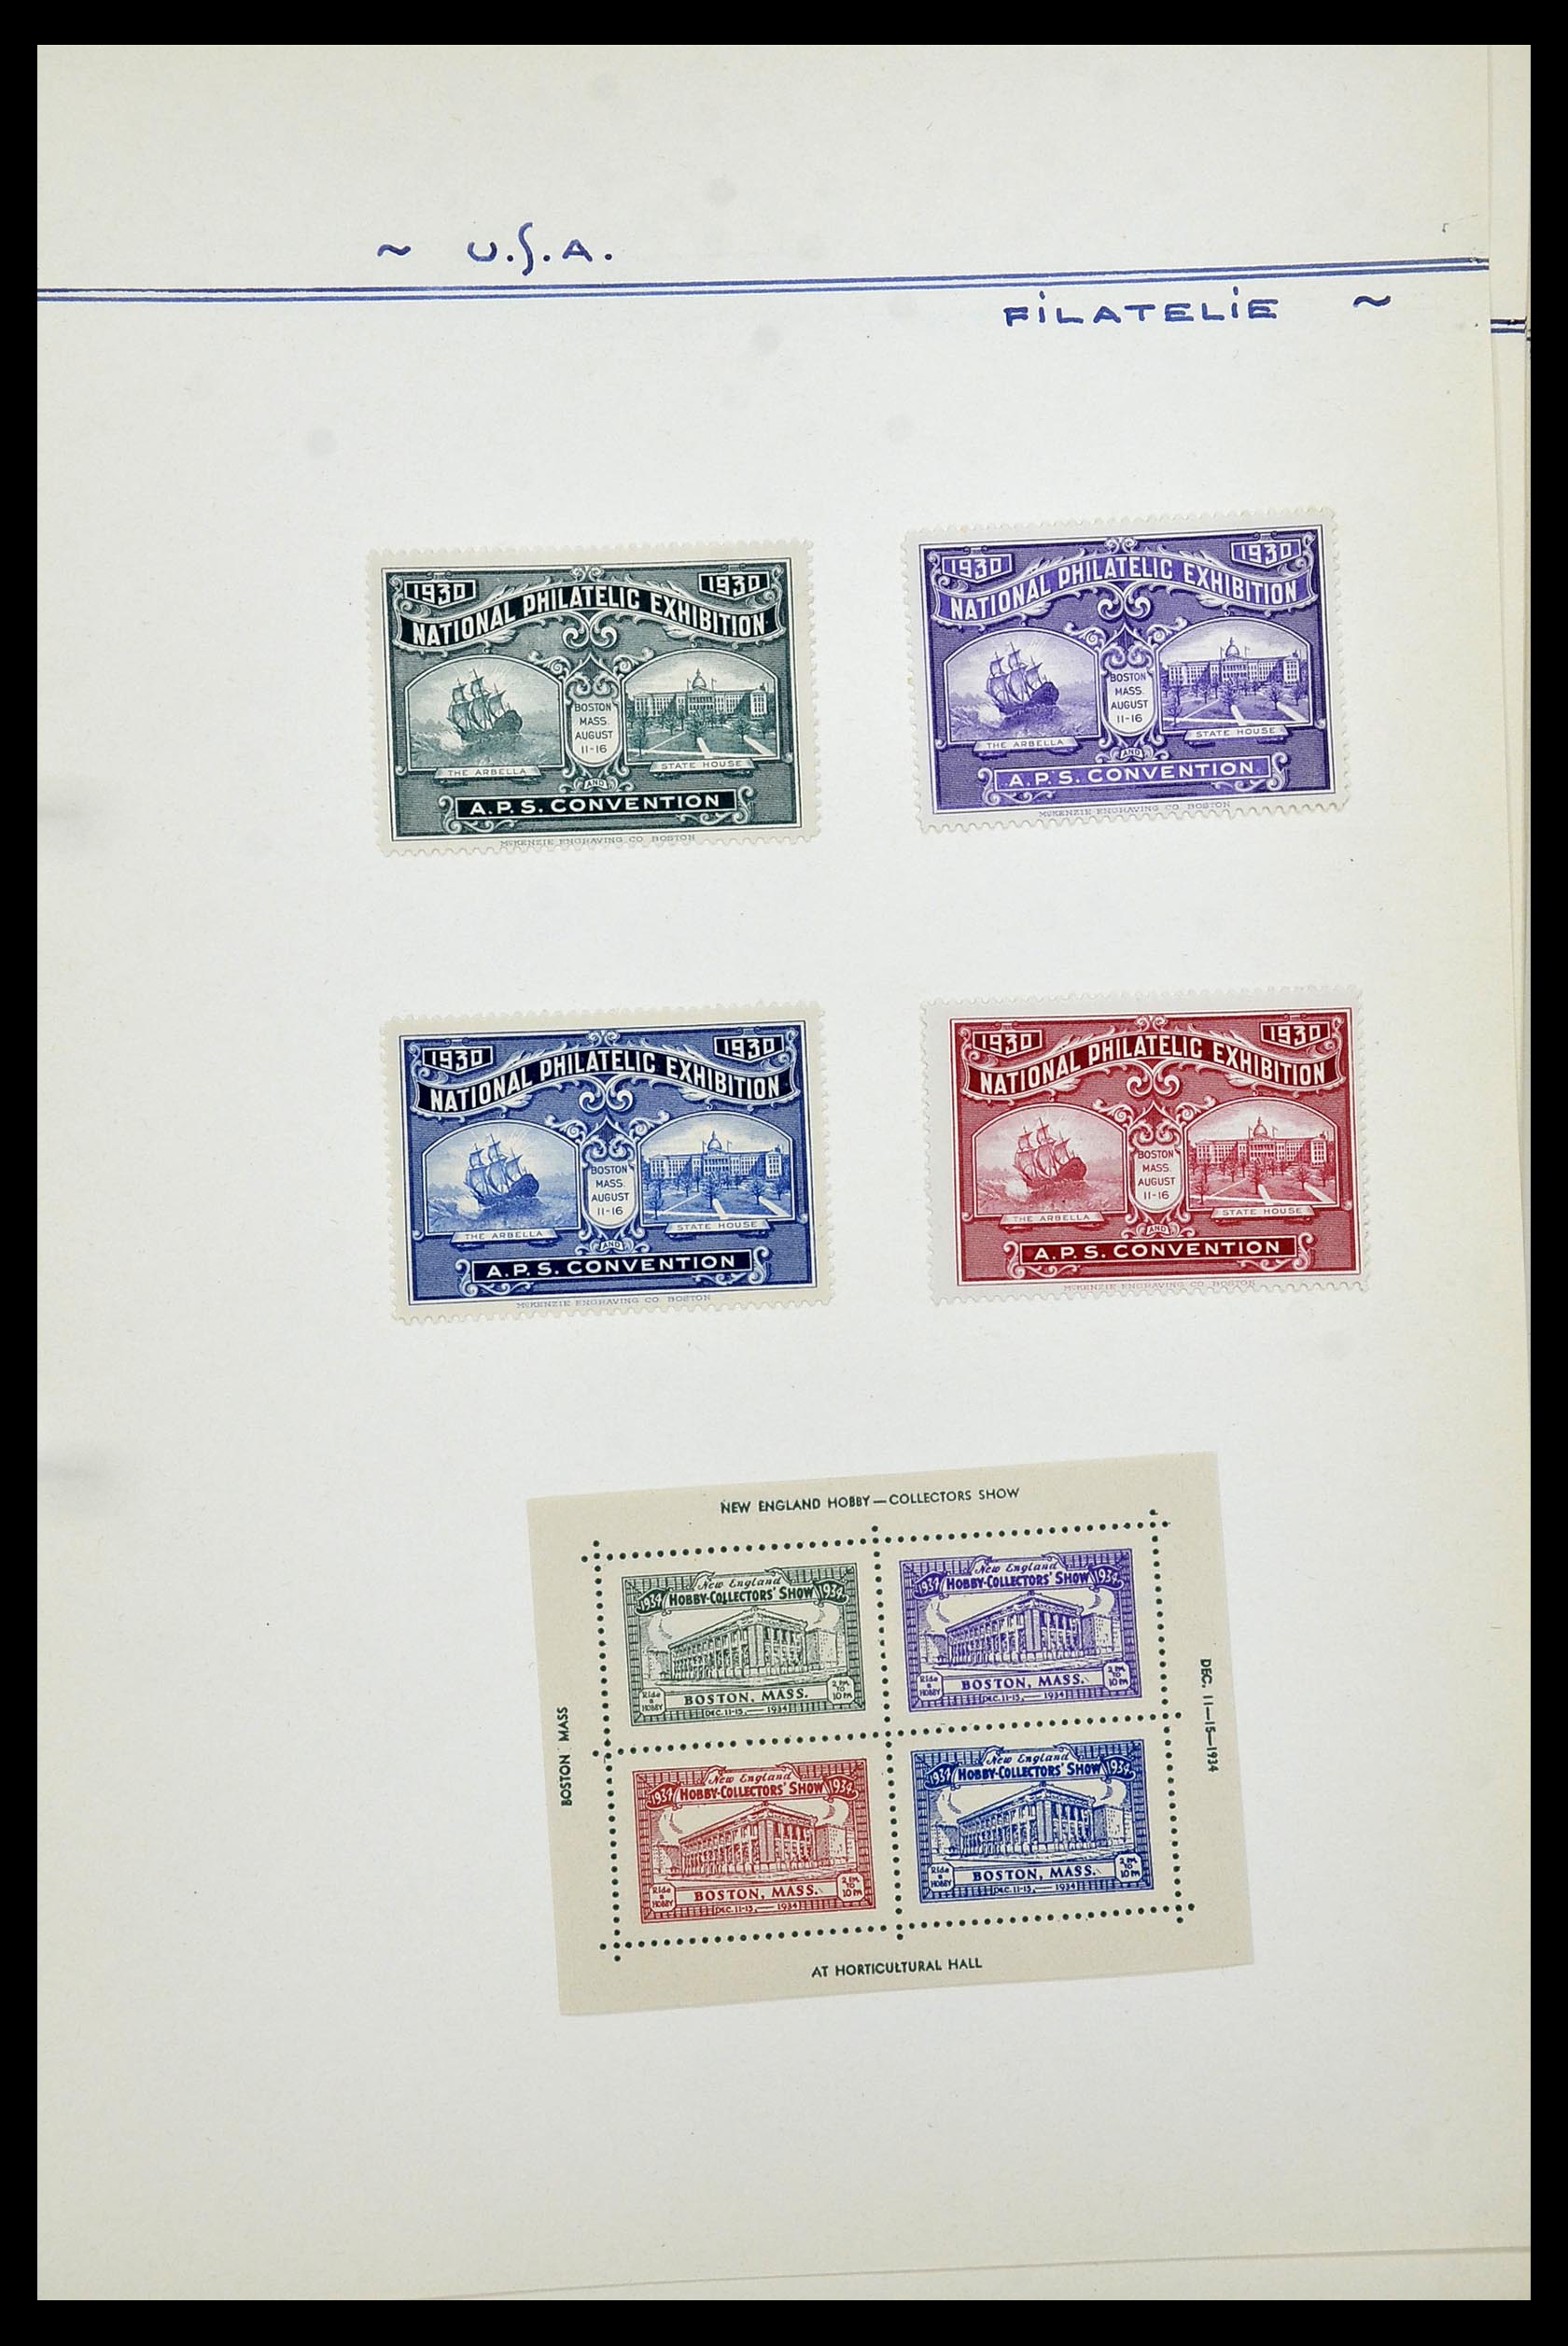 34486 032 - Stamp Collection 34486 USA philatelic labels 1926-1960.